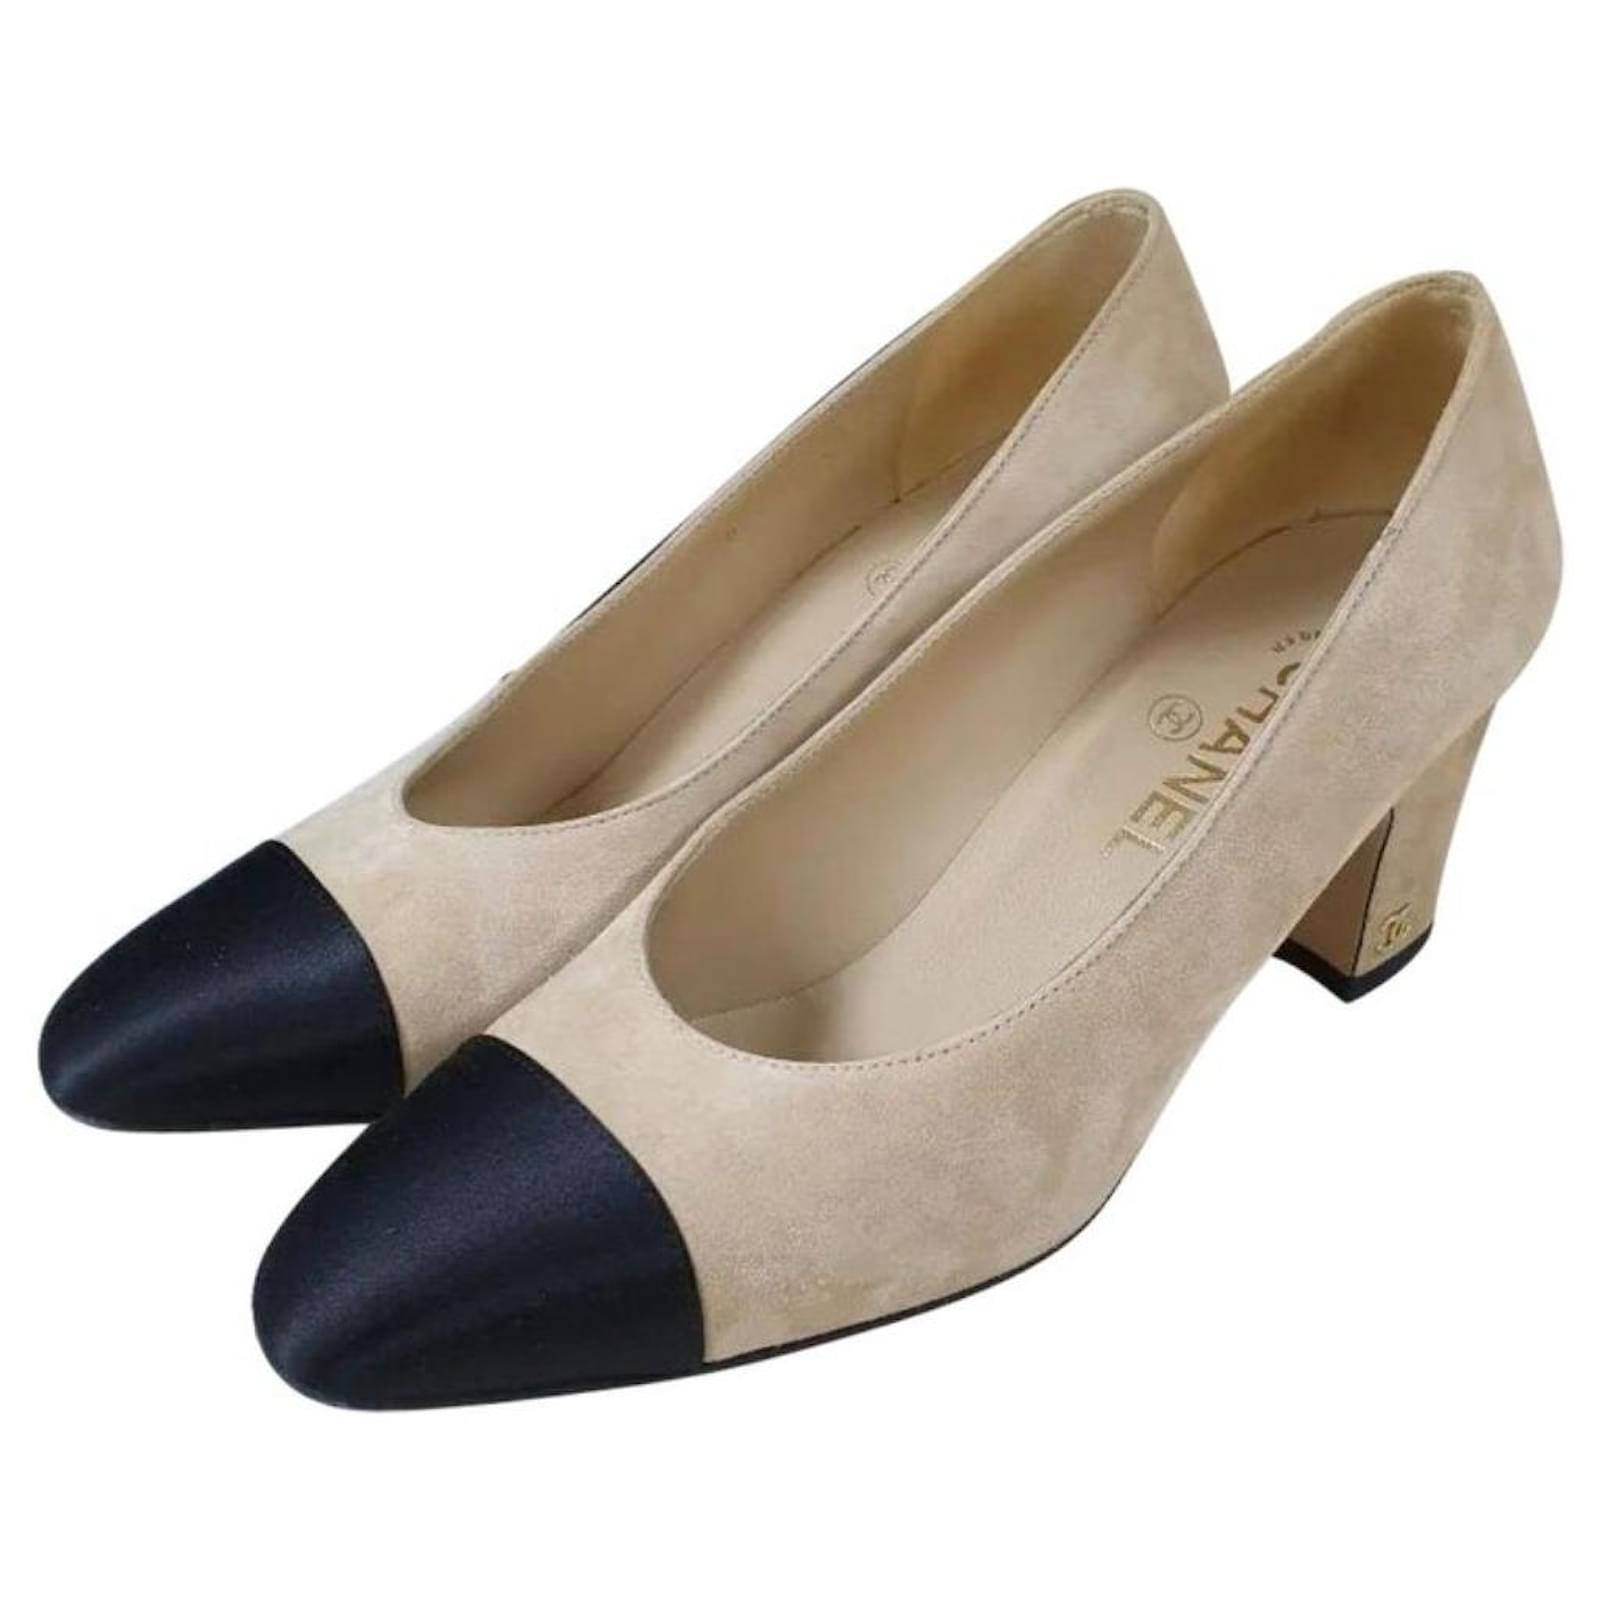 Chanel pumps in beige & black in stretch leather - DOWNTOWN UPTOWN Genève